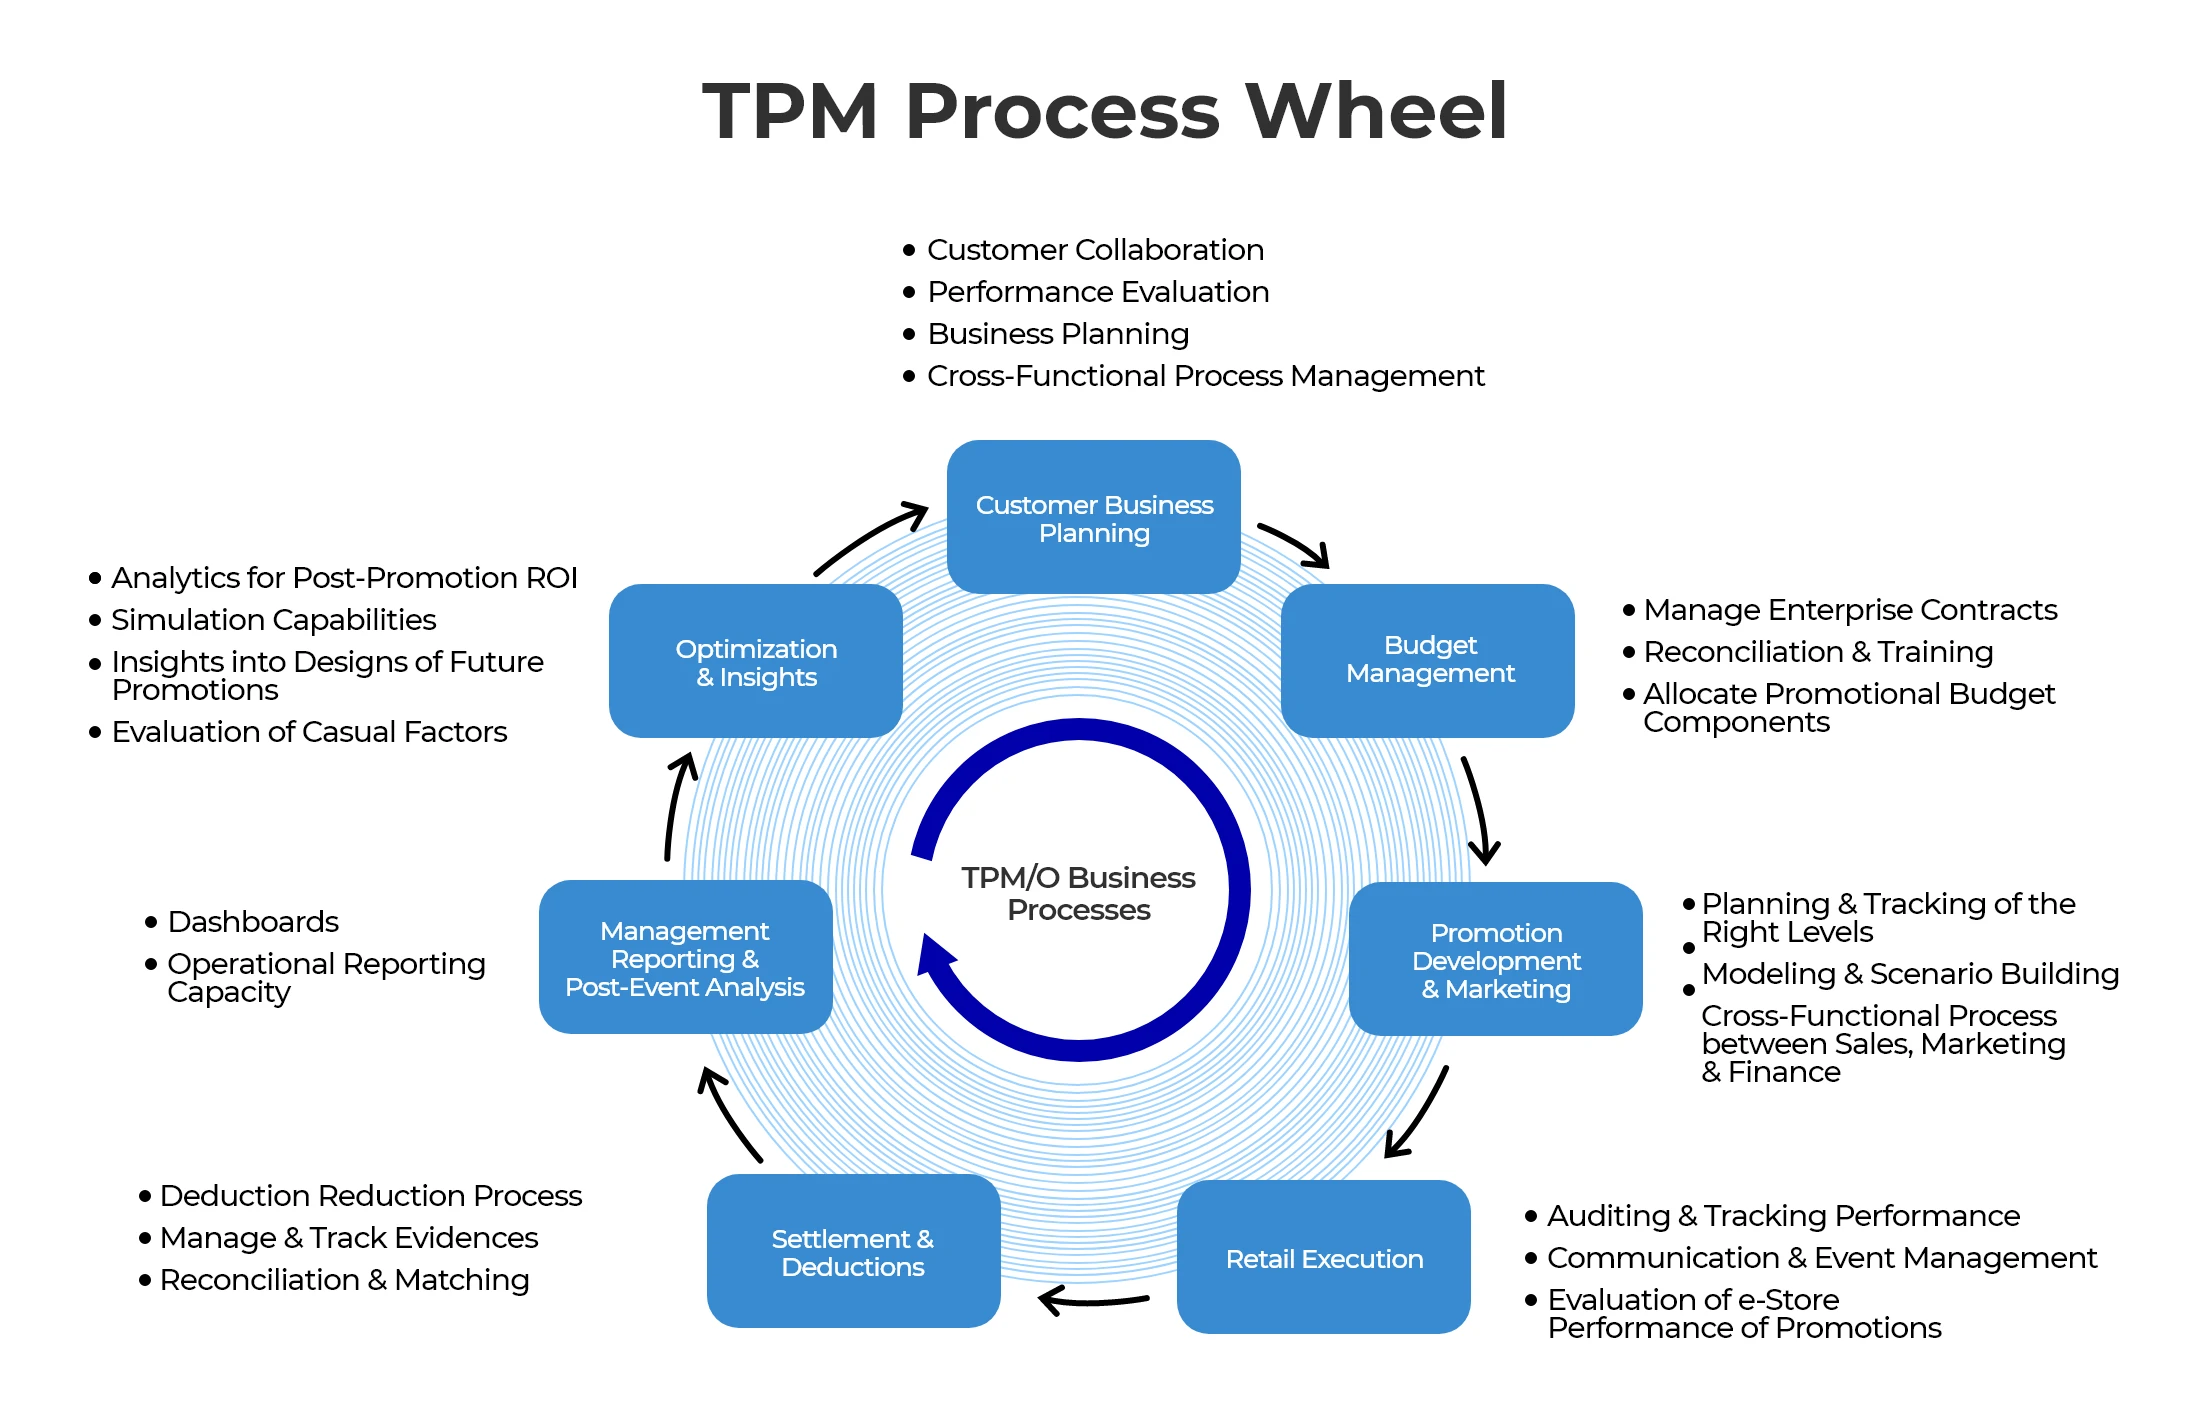 Trade Promotion Management Process Wheel Infographic Image